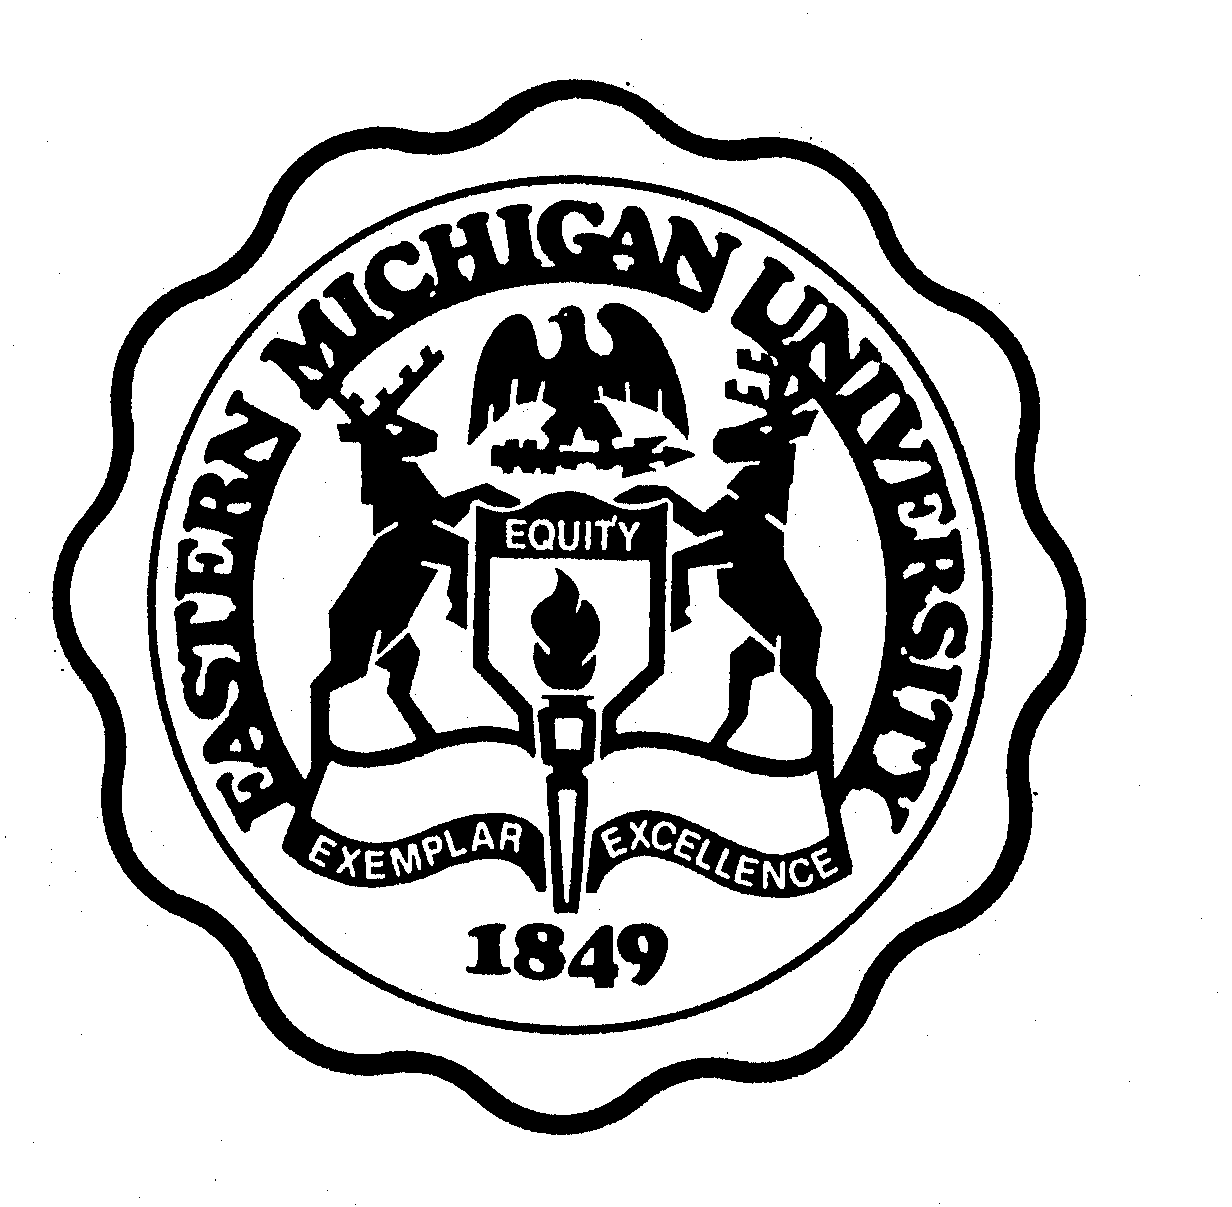  EASTERN MICHIGAN UNIVERSITY EQUITY EXEMPLAR EXCELLENCE 1849